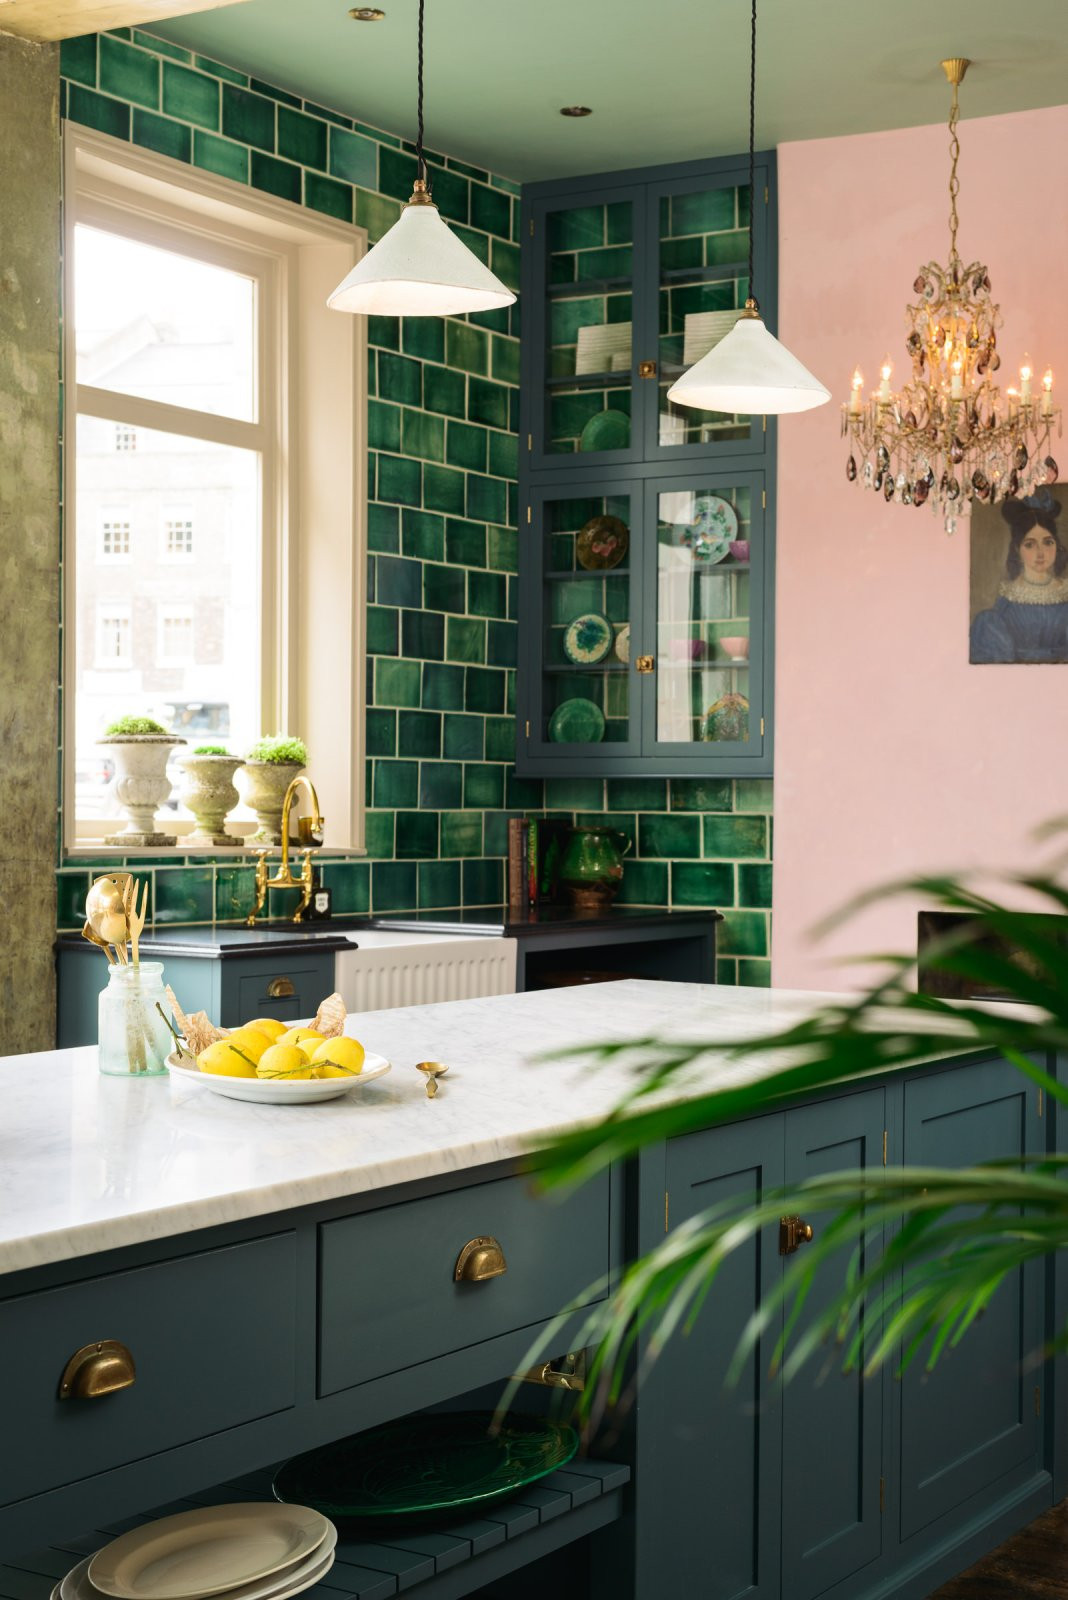 Green Kitchen Tiles
 A Pink & Green Kitchen Honestly WTF